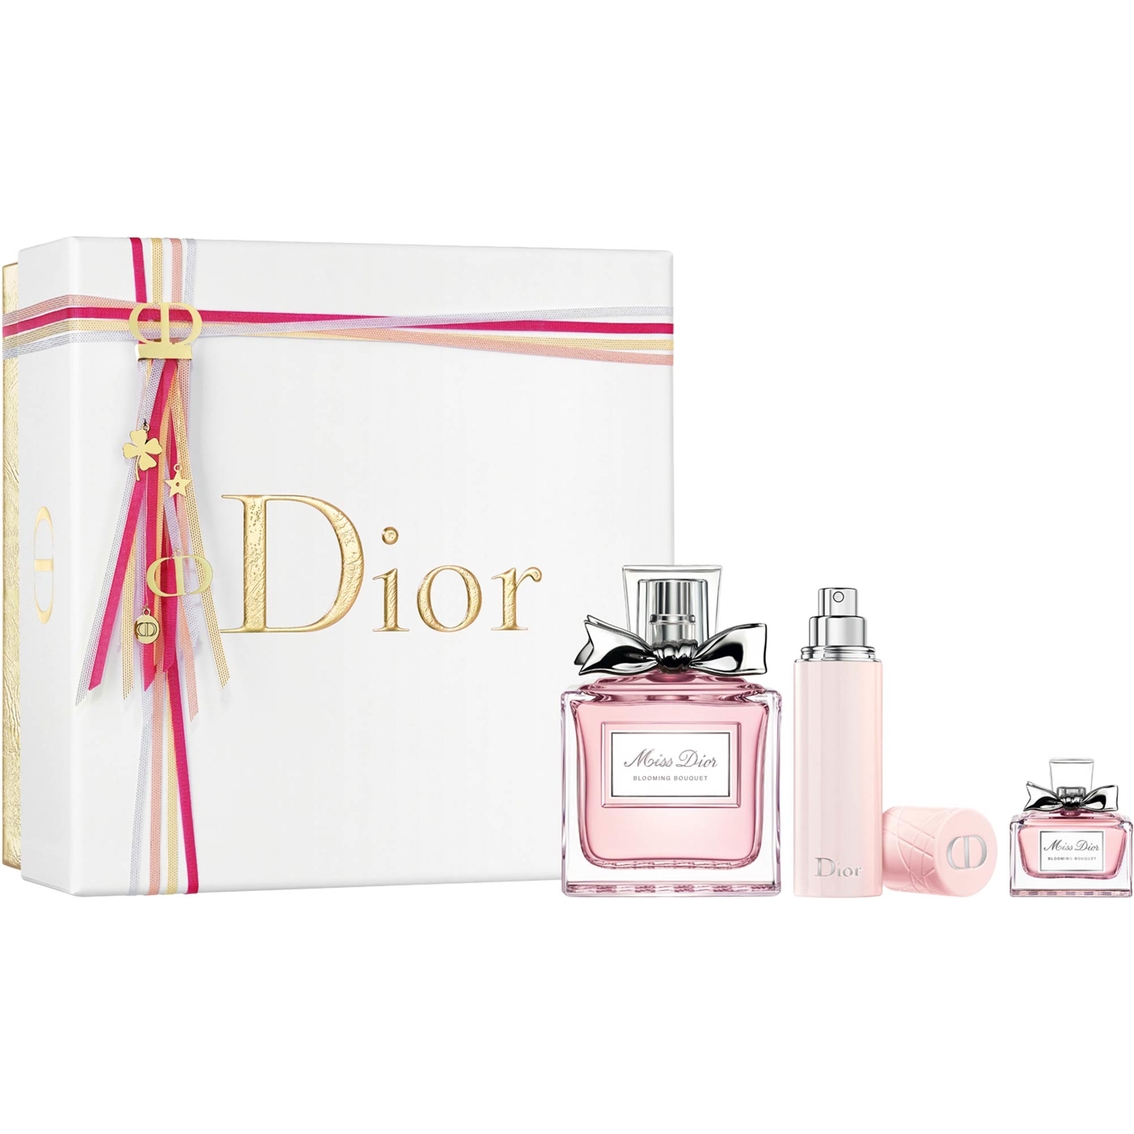 dior blooming bouquet gift set